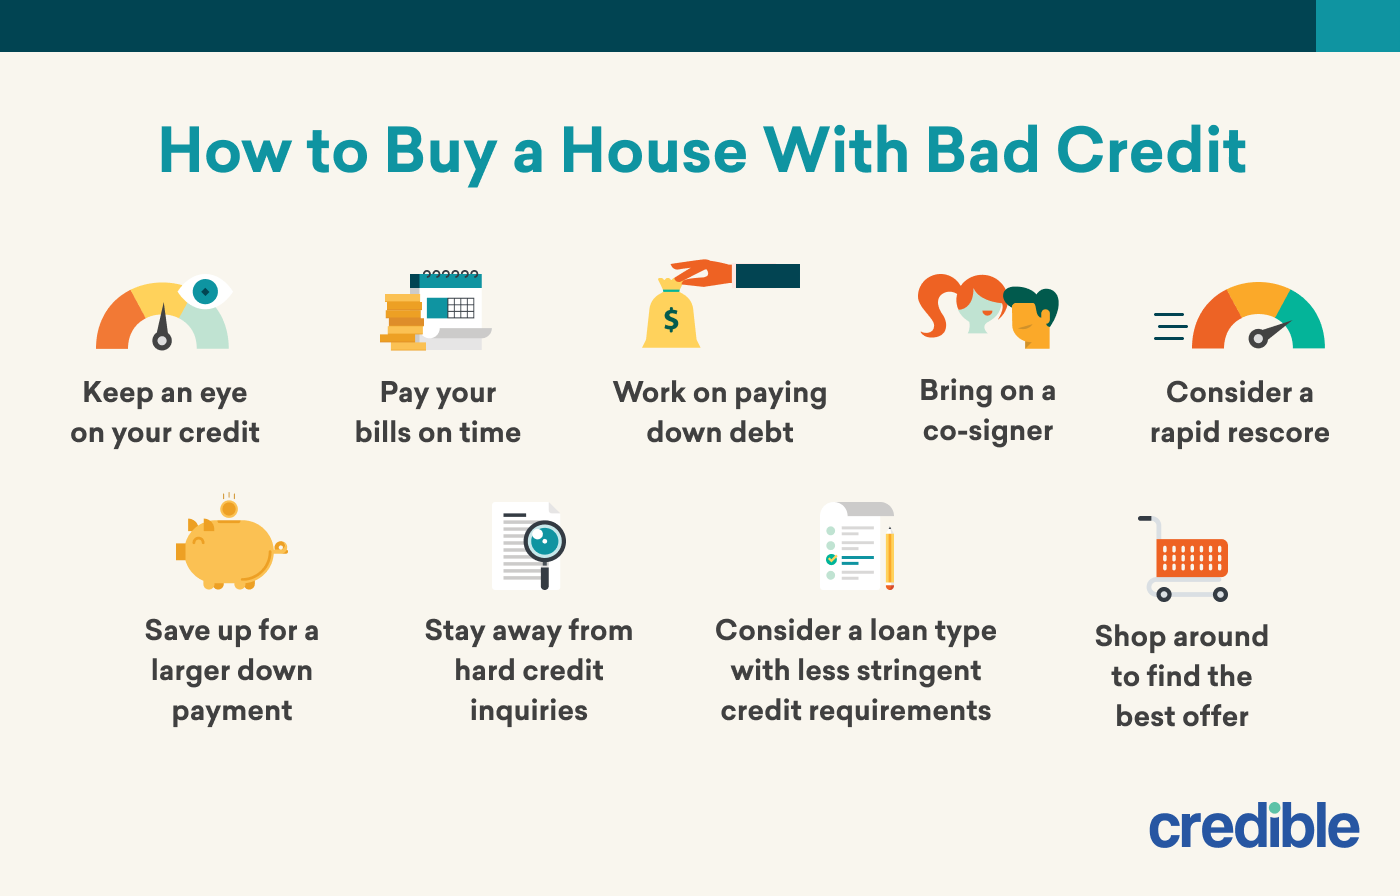 How to Buy a House With Bad Credit: Guide for 2021 - Credible